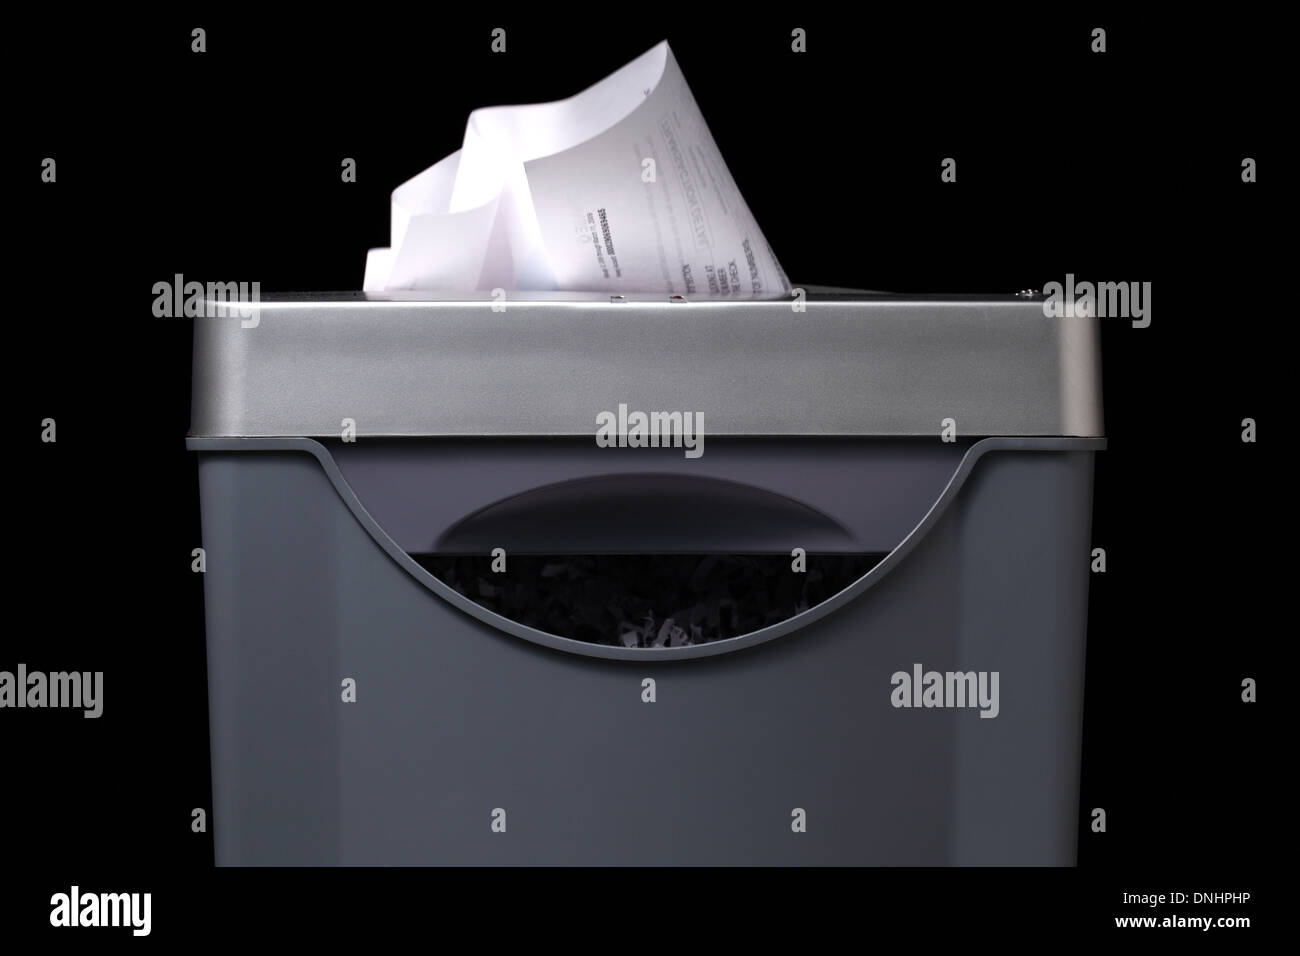 A close-up view of a paper shredder with paper going inside. Stock Photo